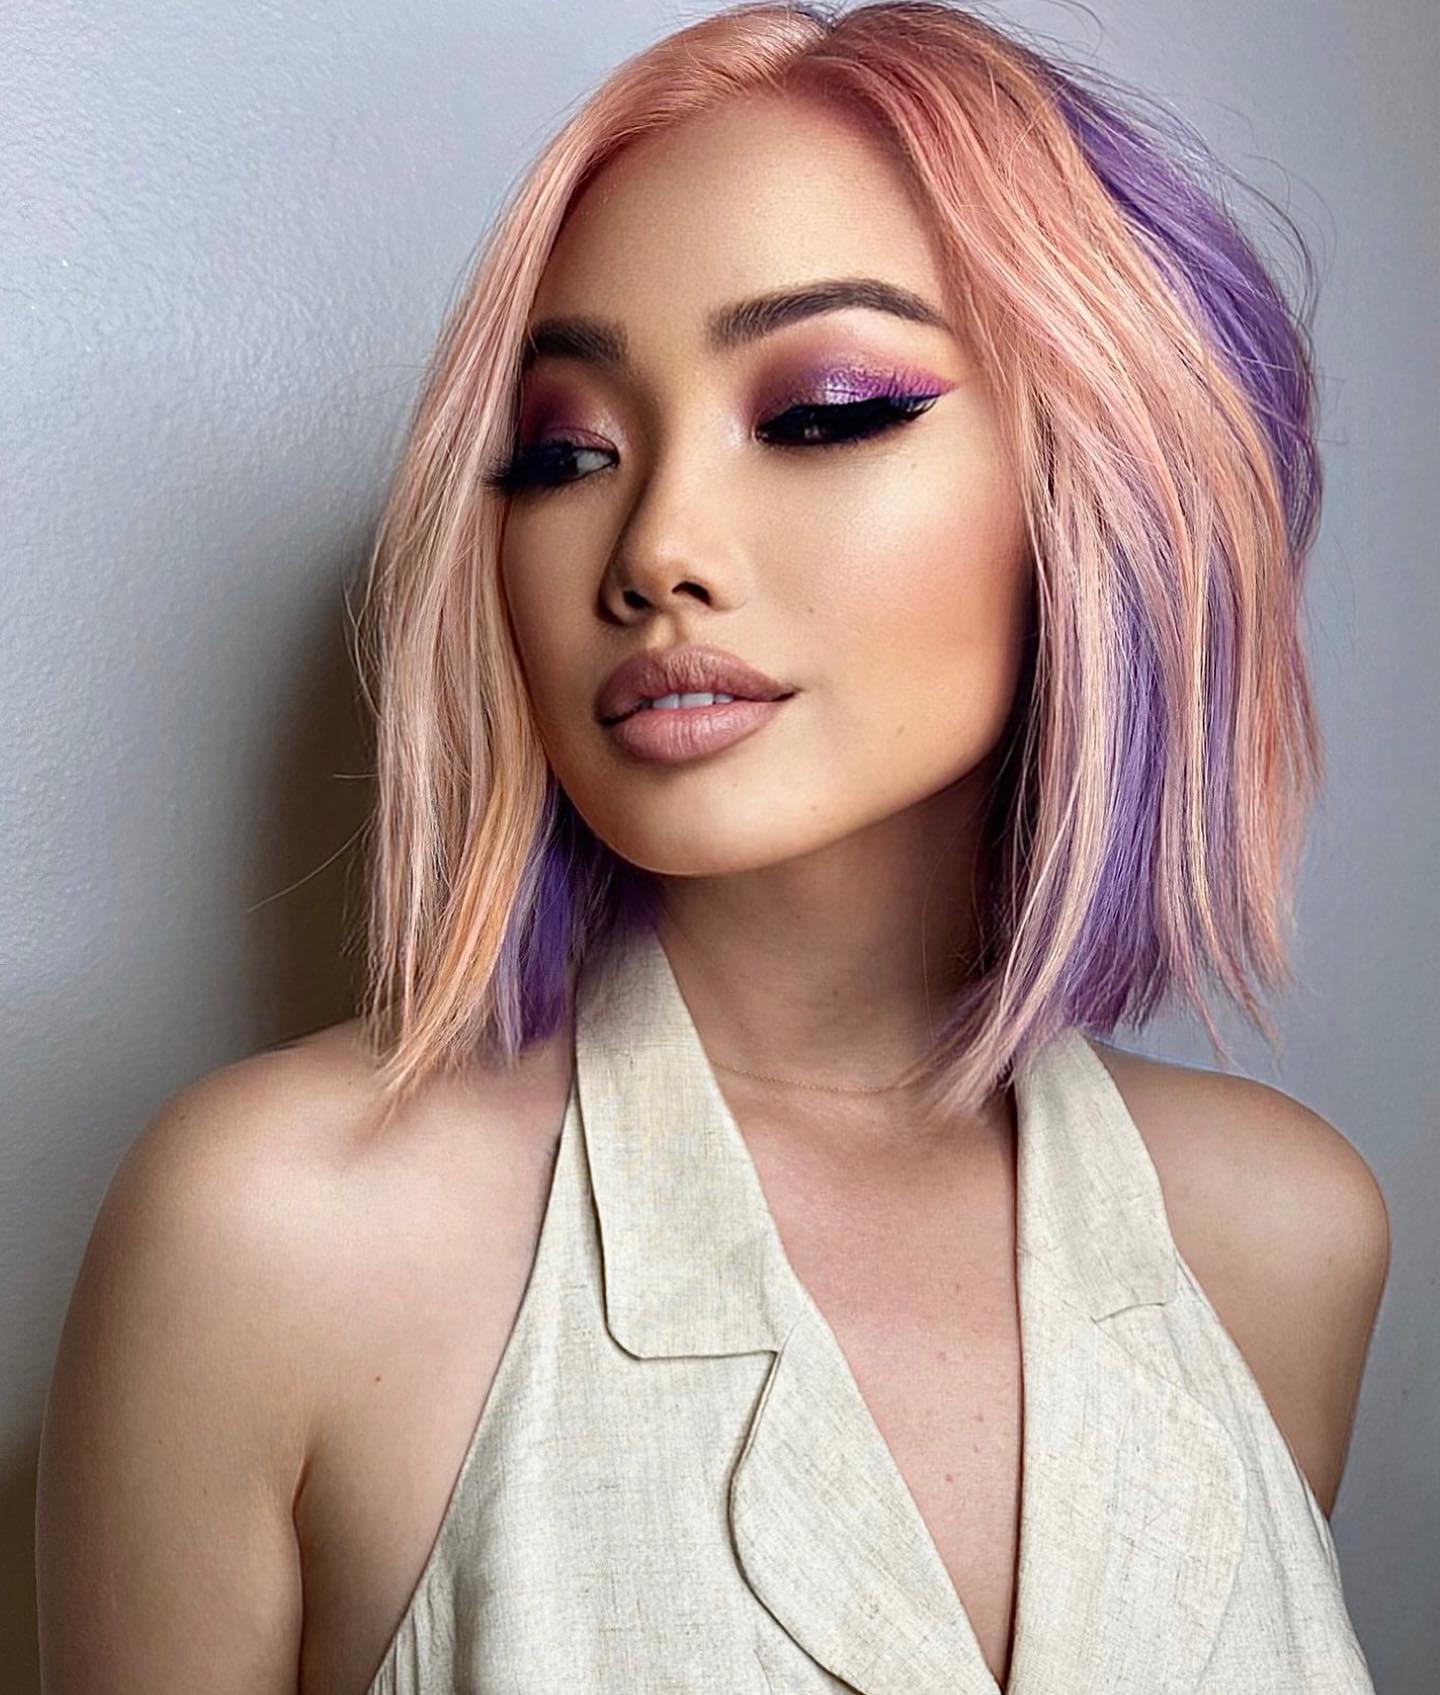 10 Most Aesthetic Purple Hairstyles (Featuring Purple Ombre, Chunky Highlights, and Grungy Hair)